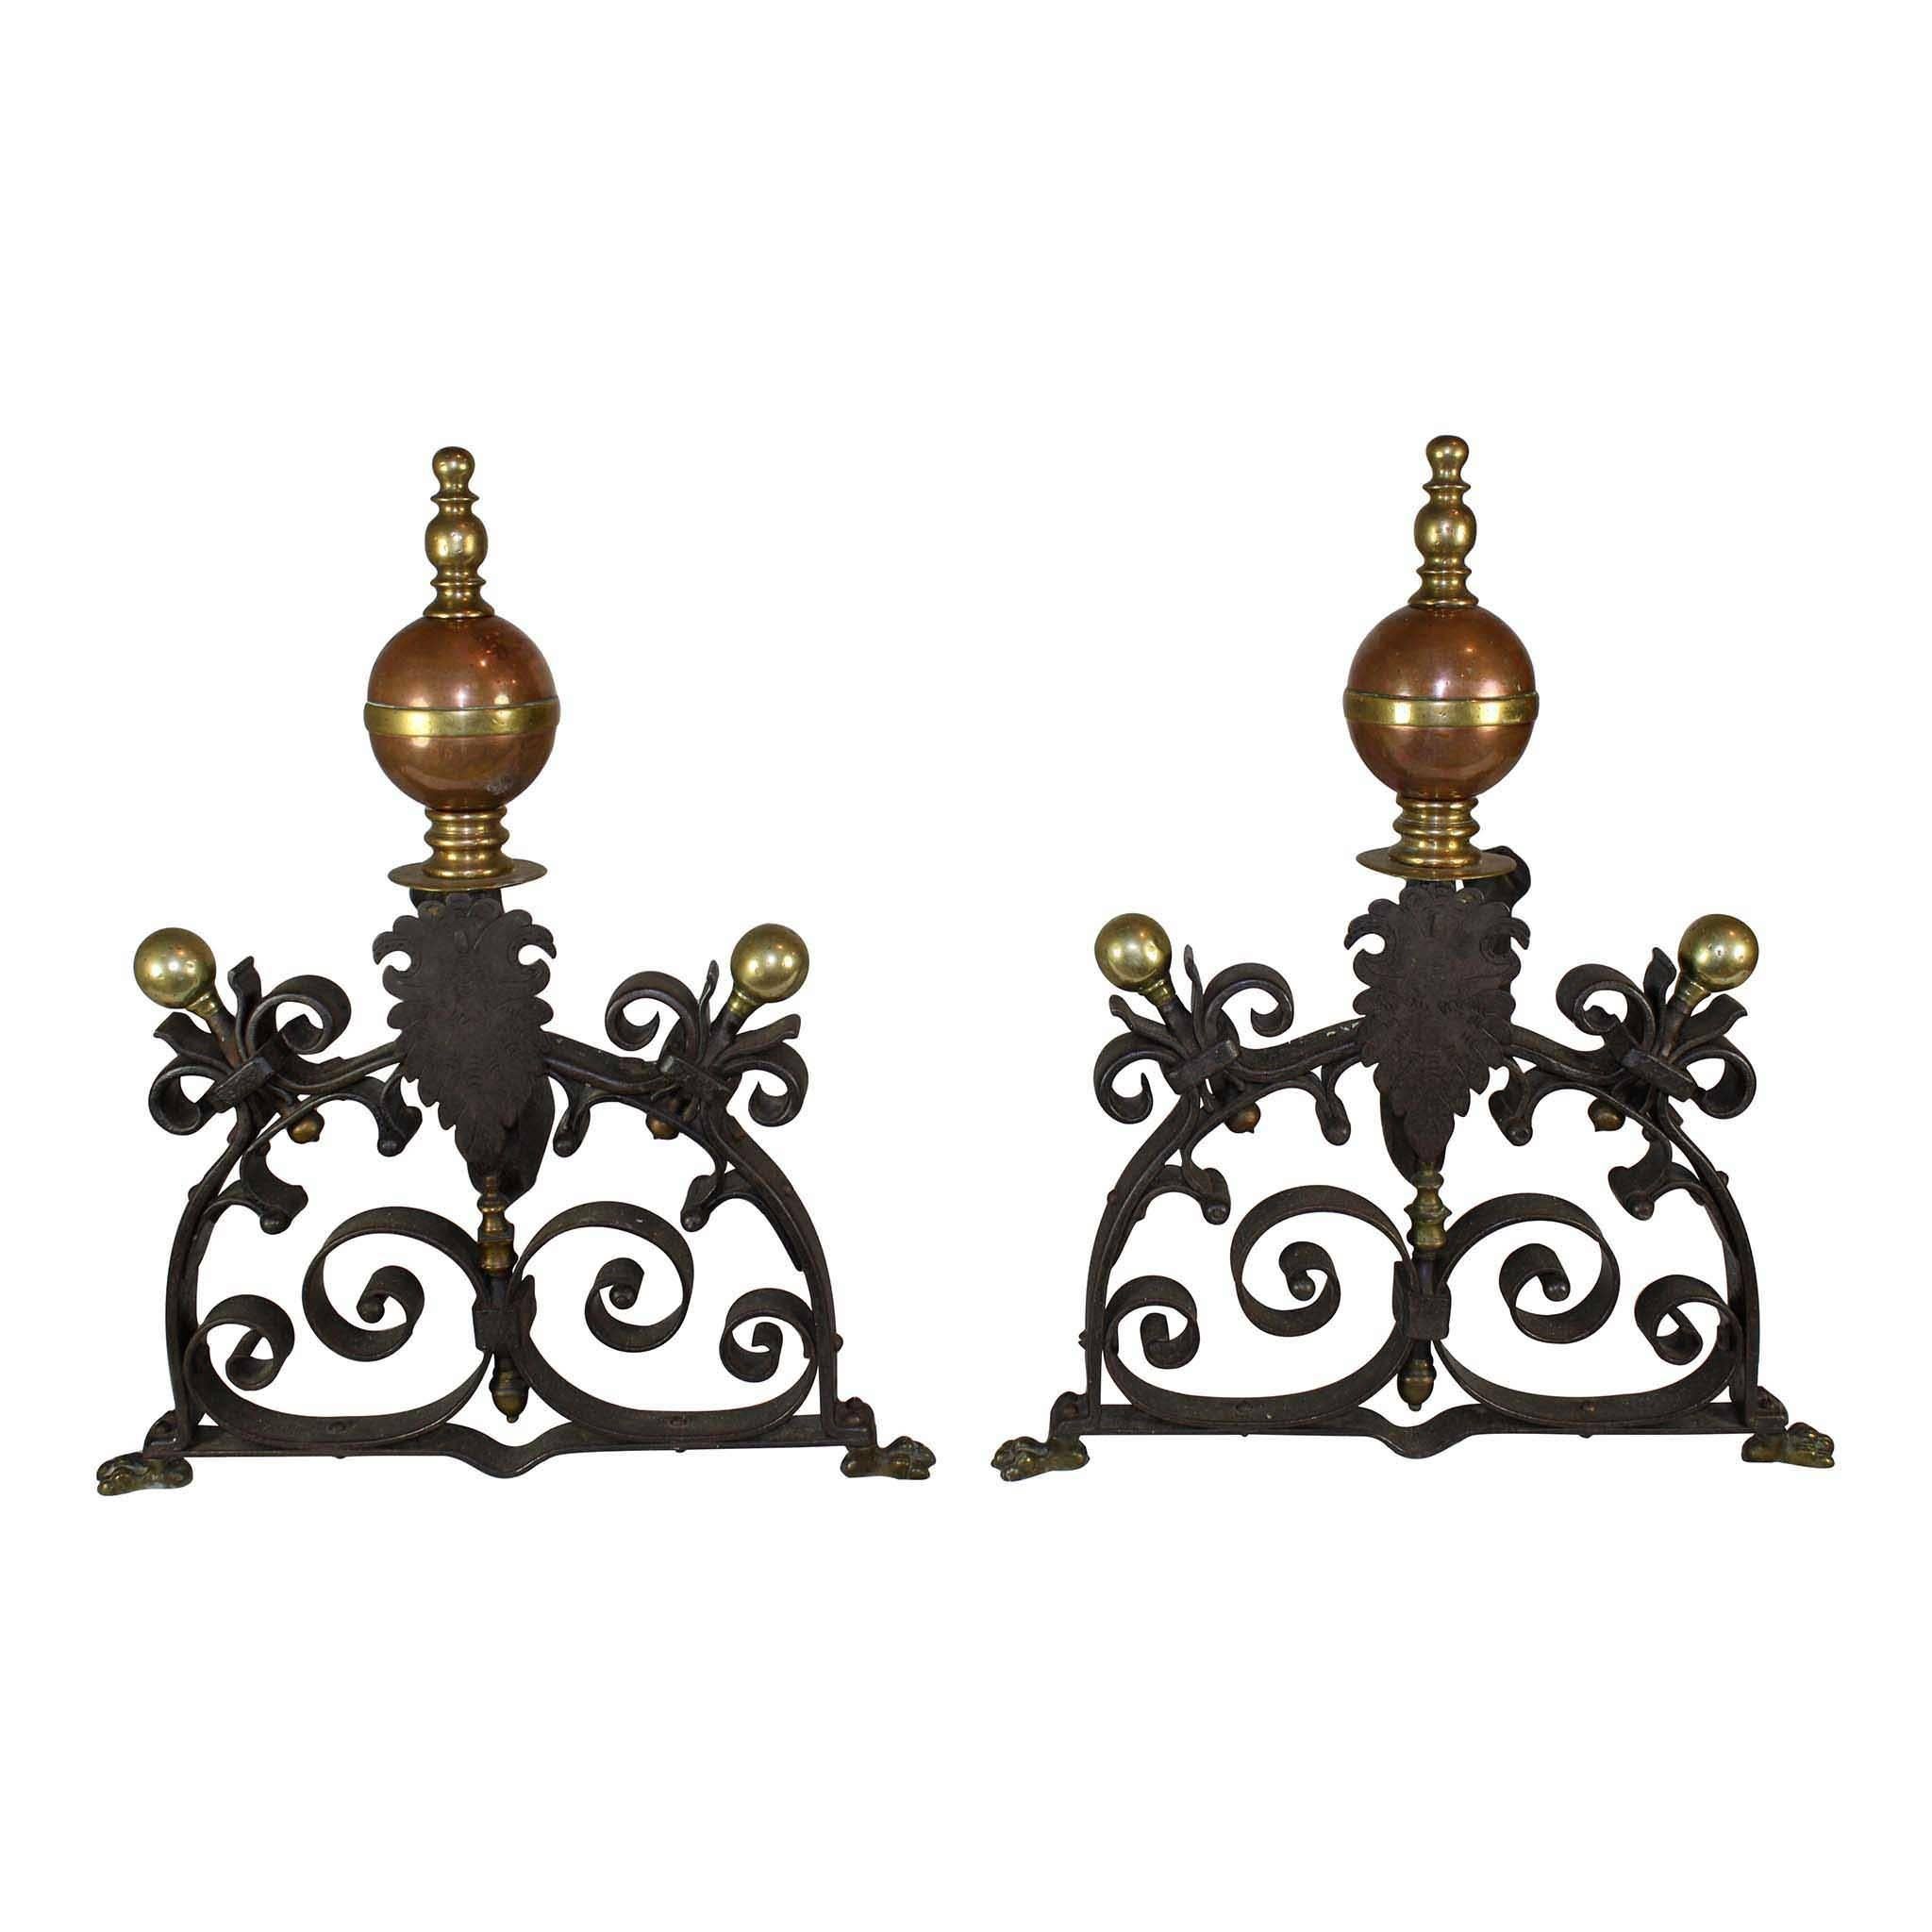 Pair of English Iron, Copper and Brass Fireplace Andirons/Fire Dogs, circa 1910